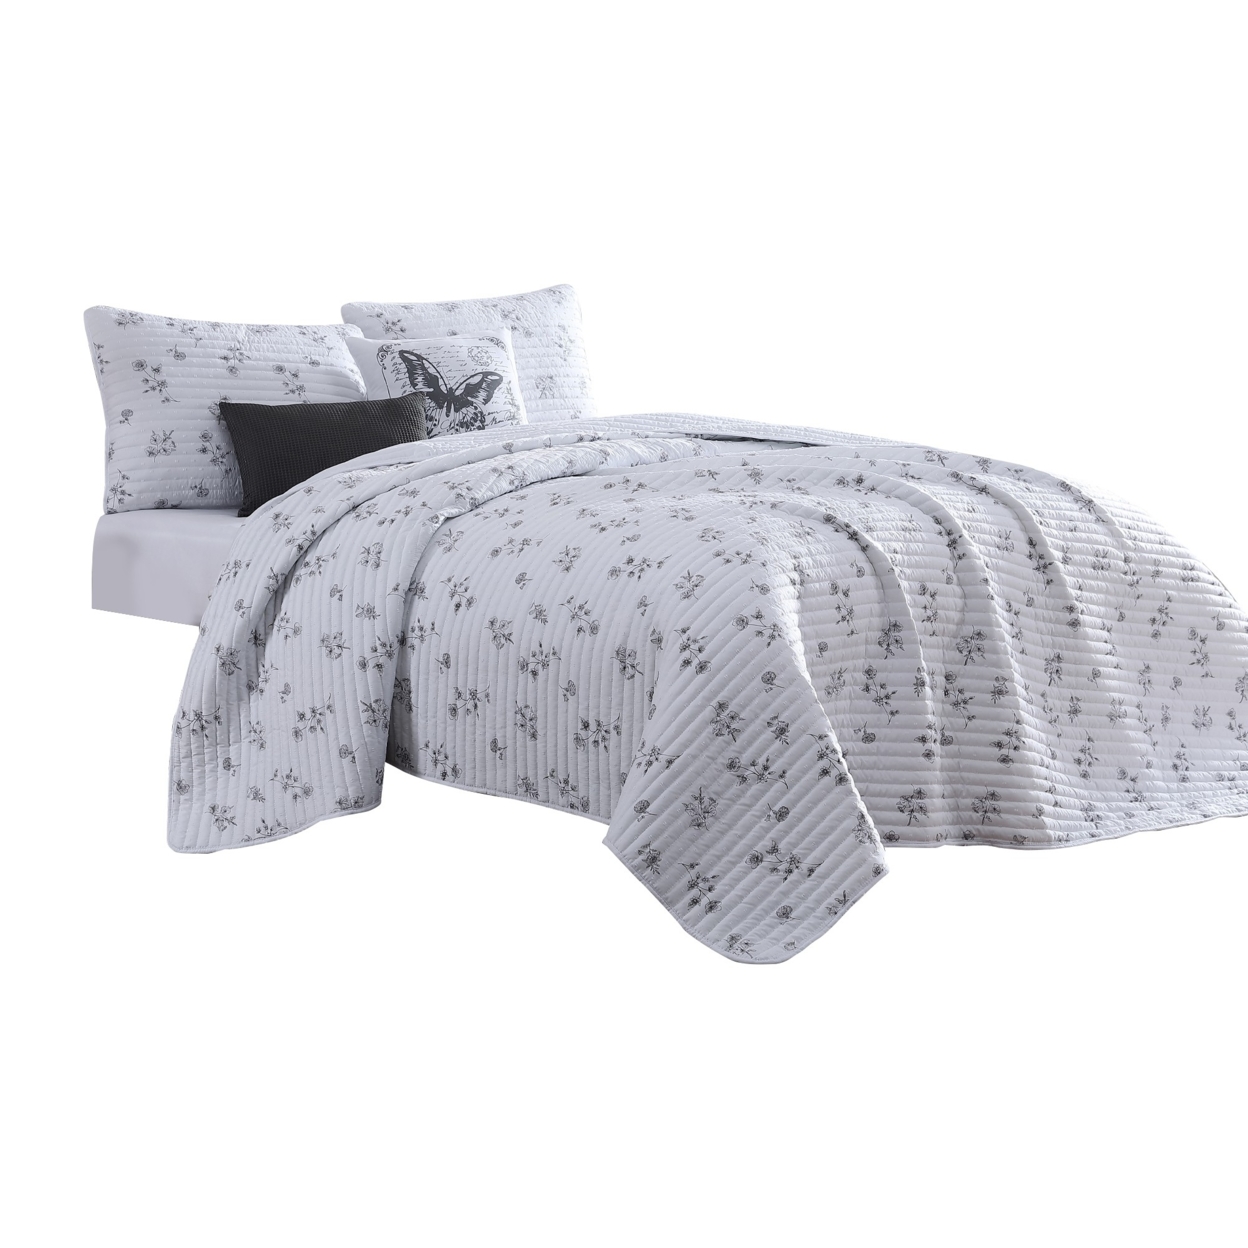 Veria 5 Piece Queen Quilt Set With Floral Print The Urban Port, White And Gray- Saltoro Sherpi